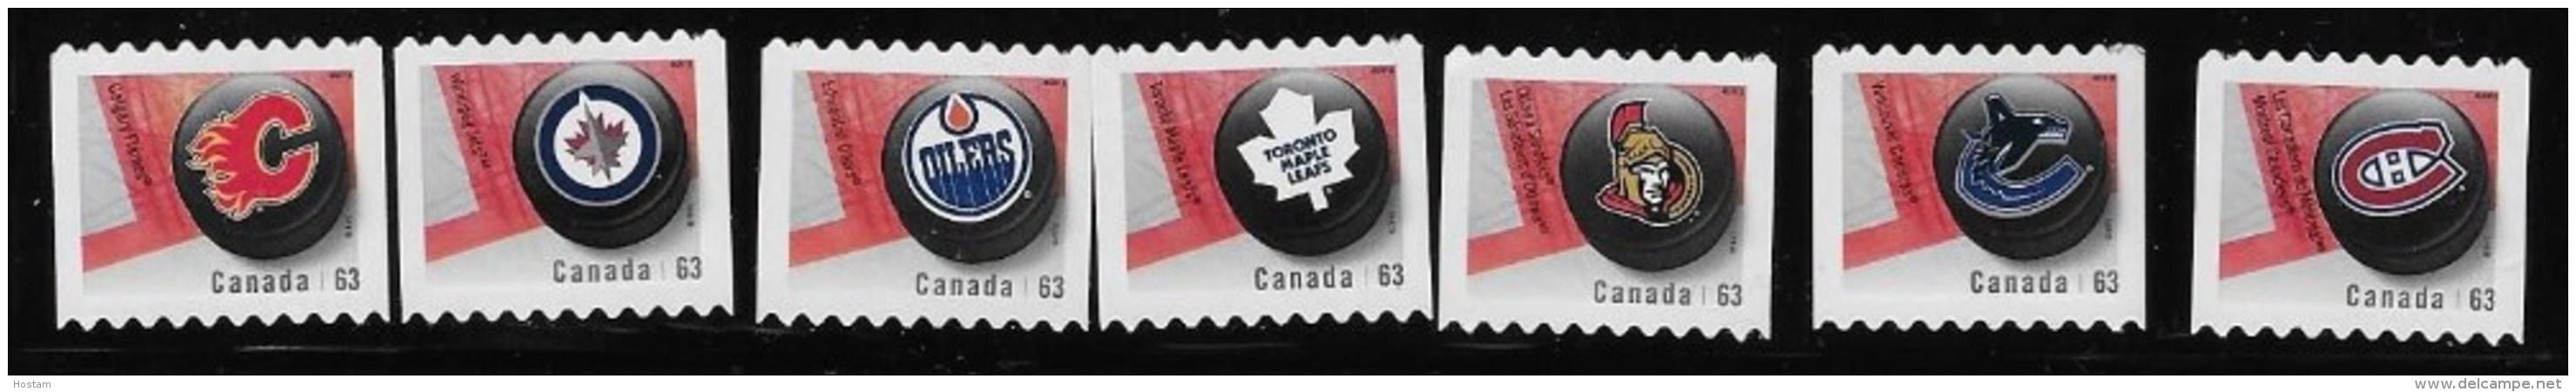 CANADA, 2013, #2662ii-8ii, NHL TEAM LOGO  COIL STAMPS - 7 CANADIAN TEAMS   SINGLE - Coil Stamps